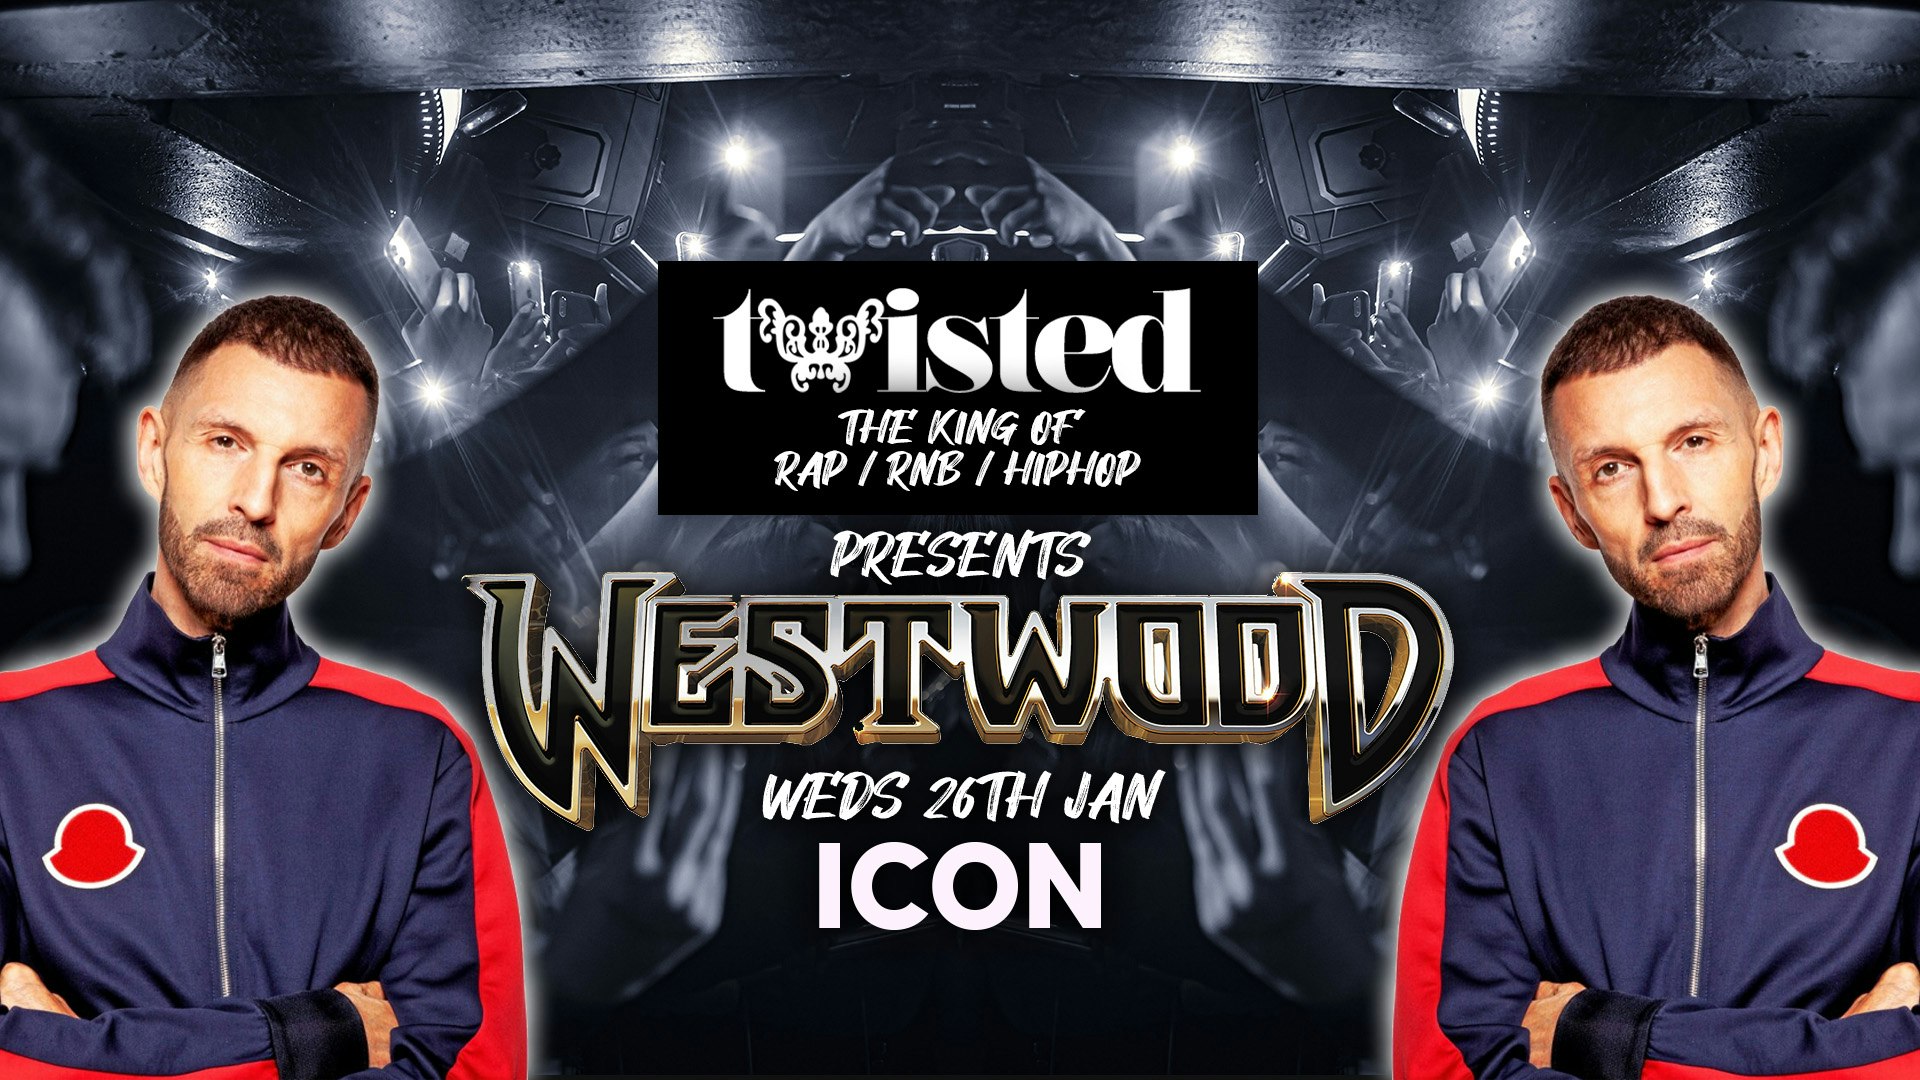 Twisted Presents Tim Westwood Live [2-4-1 DRINKS] [FINAL 10 TICKETS]